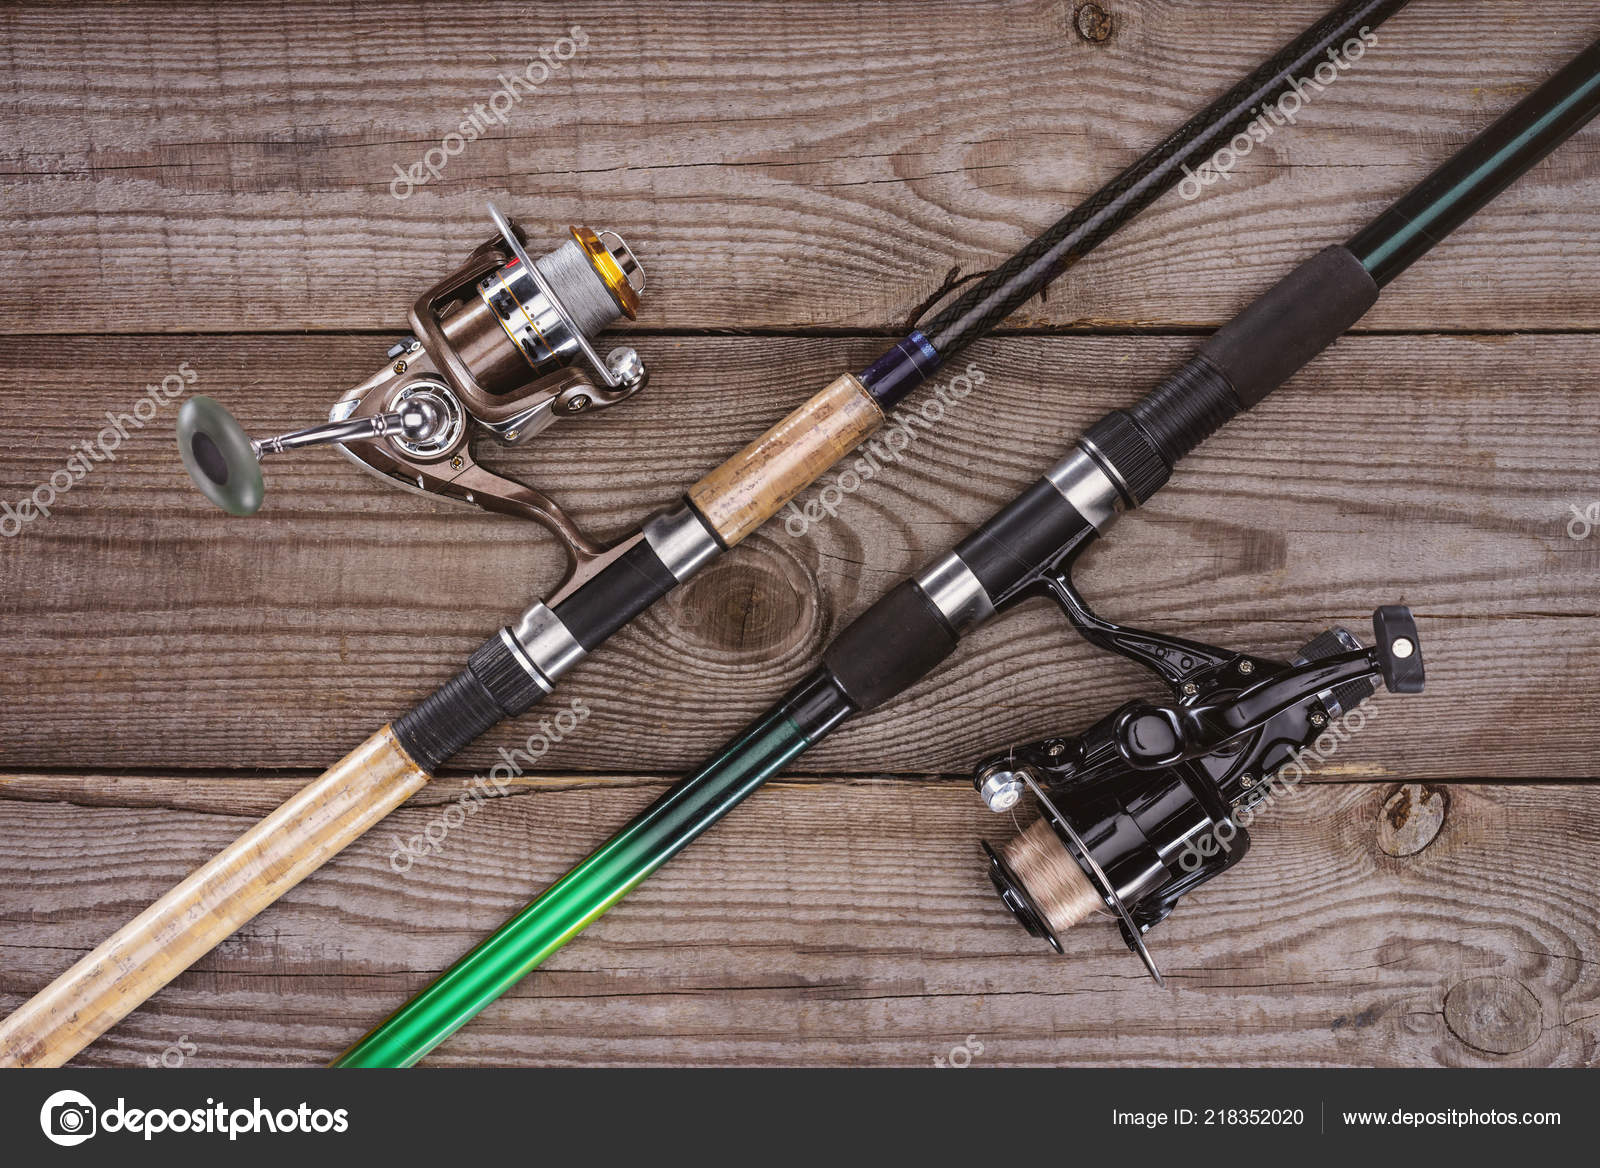 Fishing Rods And Reels With Line On Green Wooden Background, 46% OFF